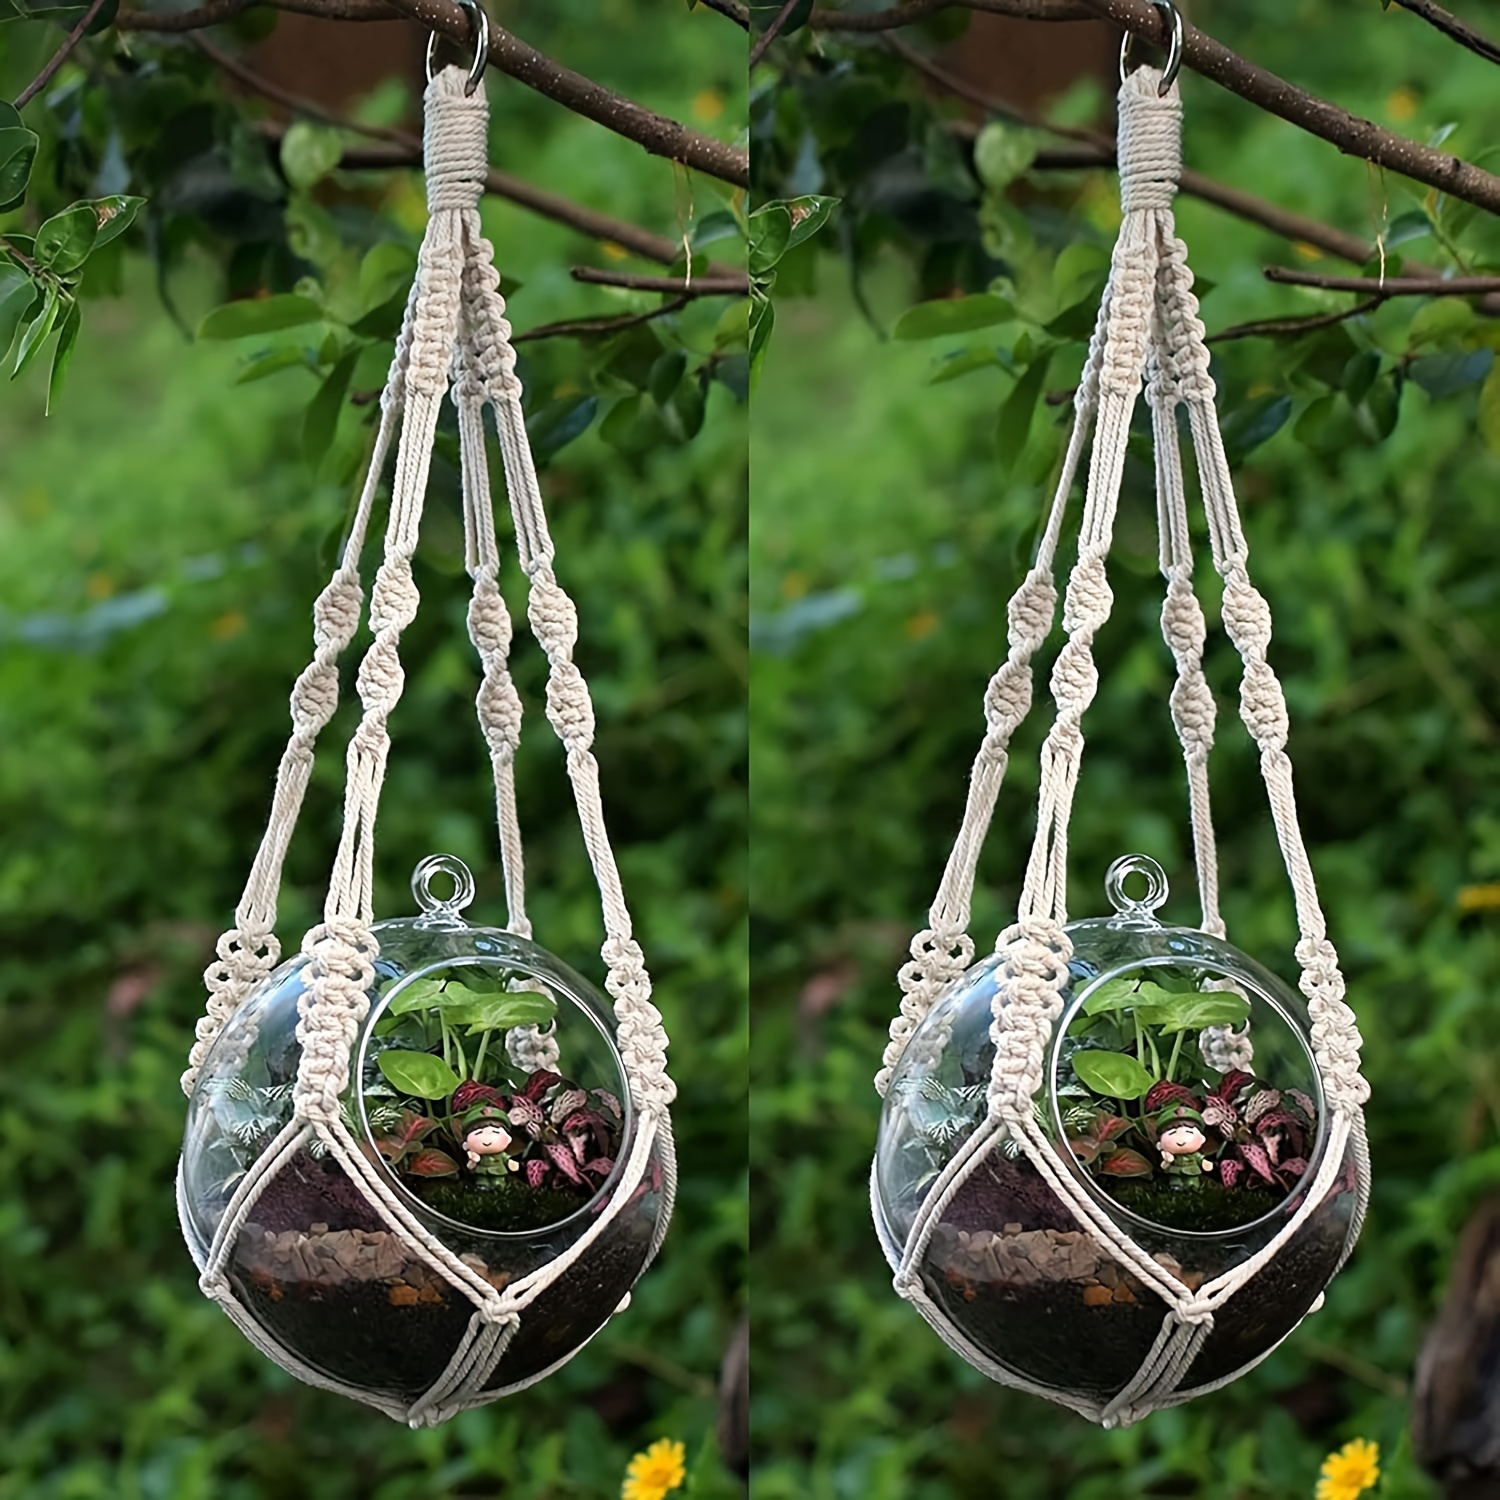 

2 Packs, Macrame Plant Hanger Indoor Outdoor Hanging Planter Natural Manual Knitted Cotton Macrame Cord Plant Hanger With Ring For Home Decor Ceiling Wall Planters Hanging, 20 Inch